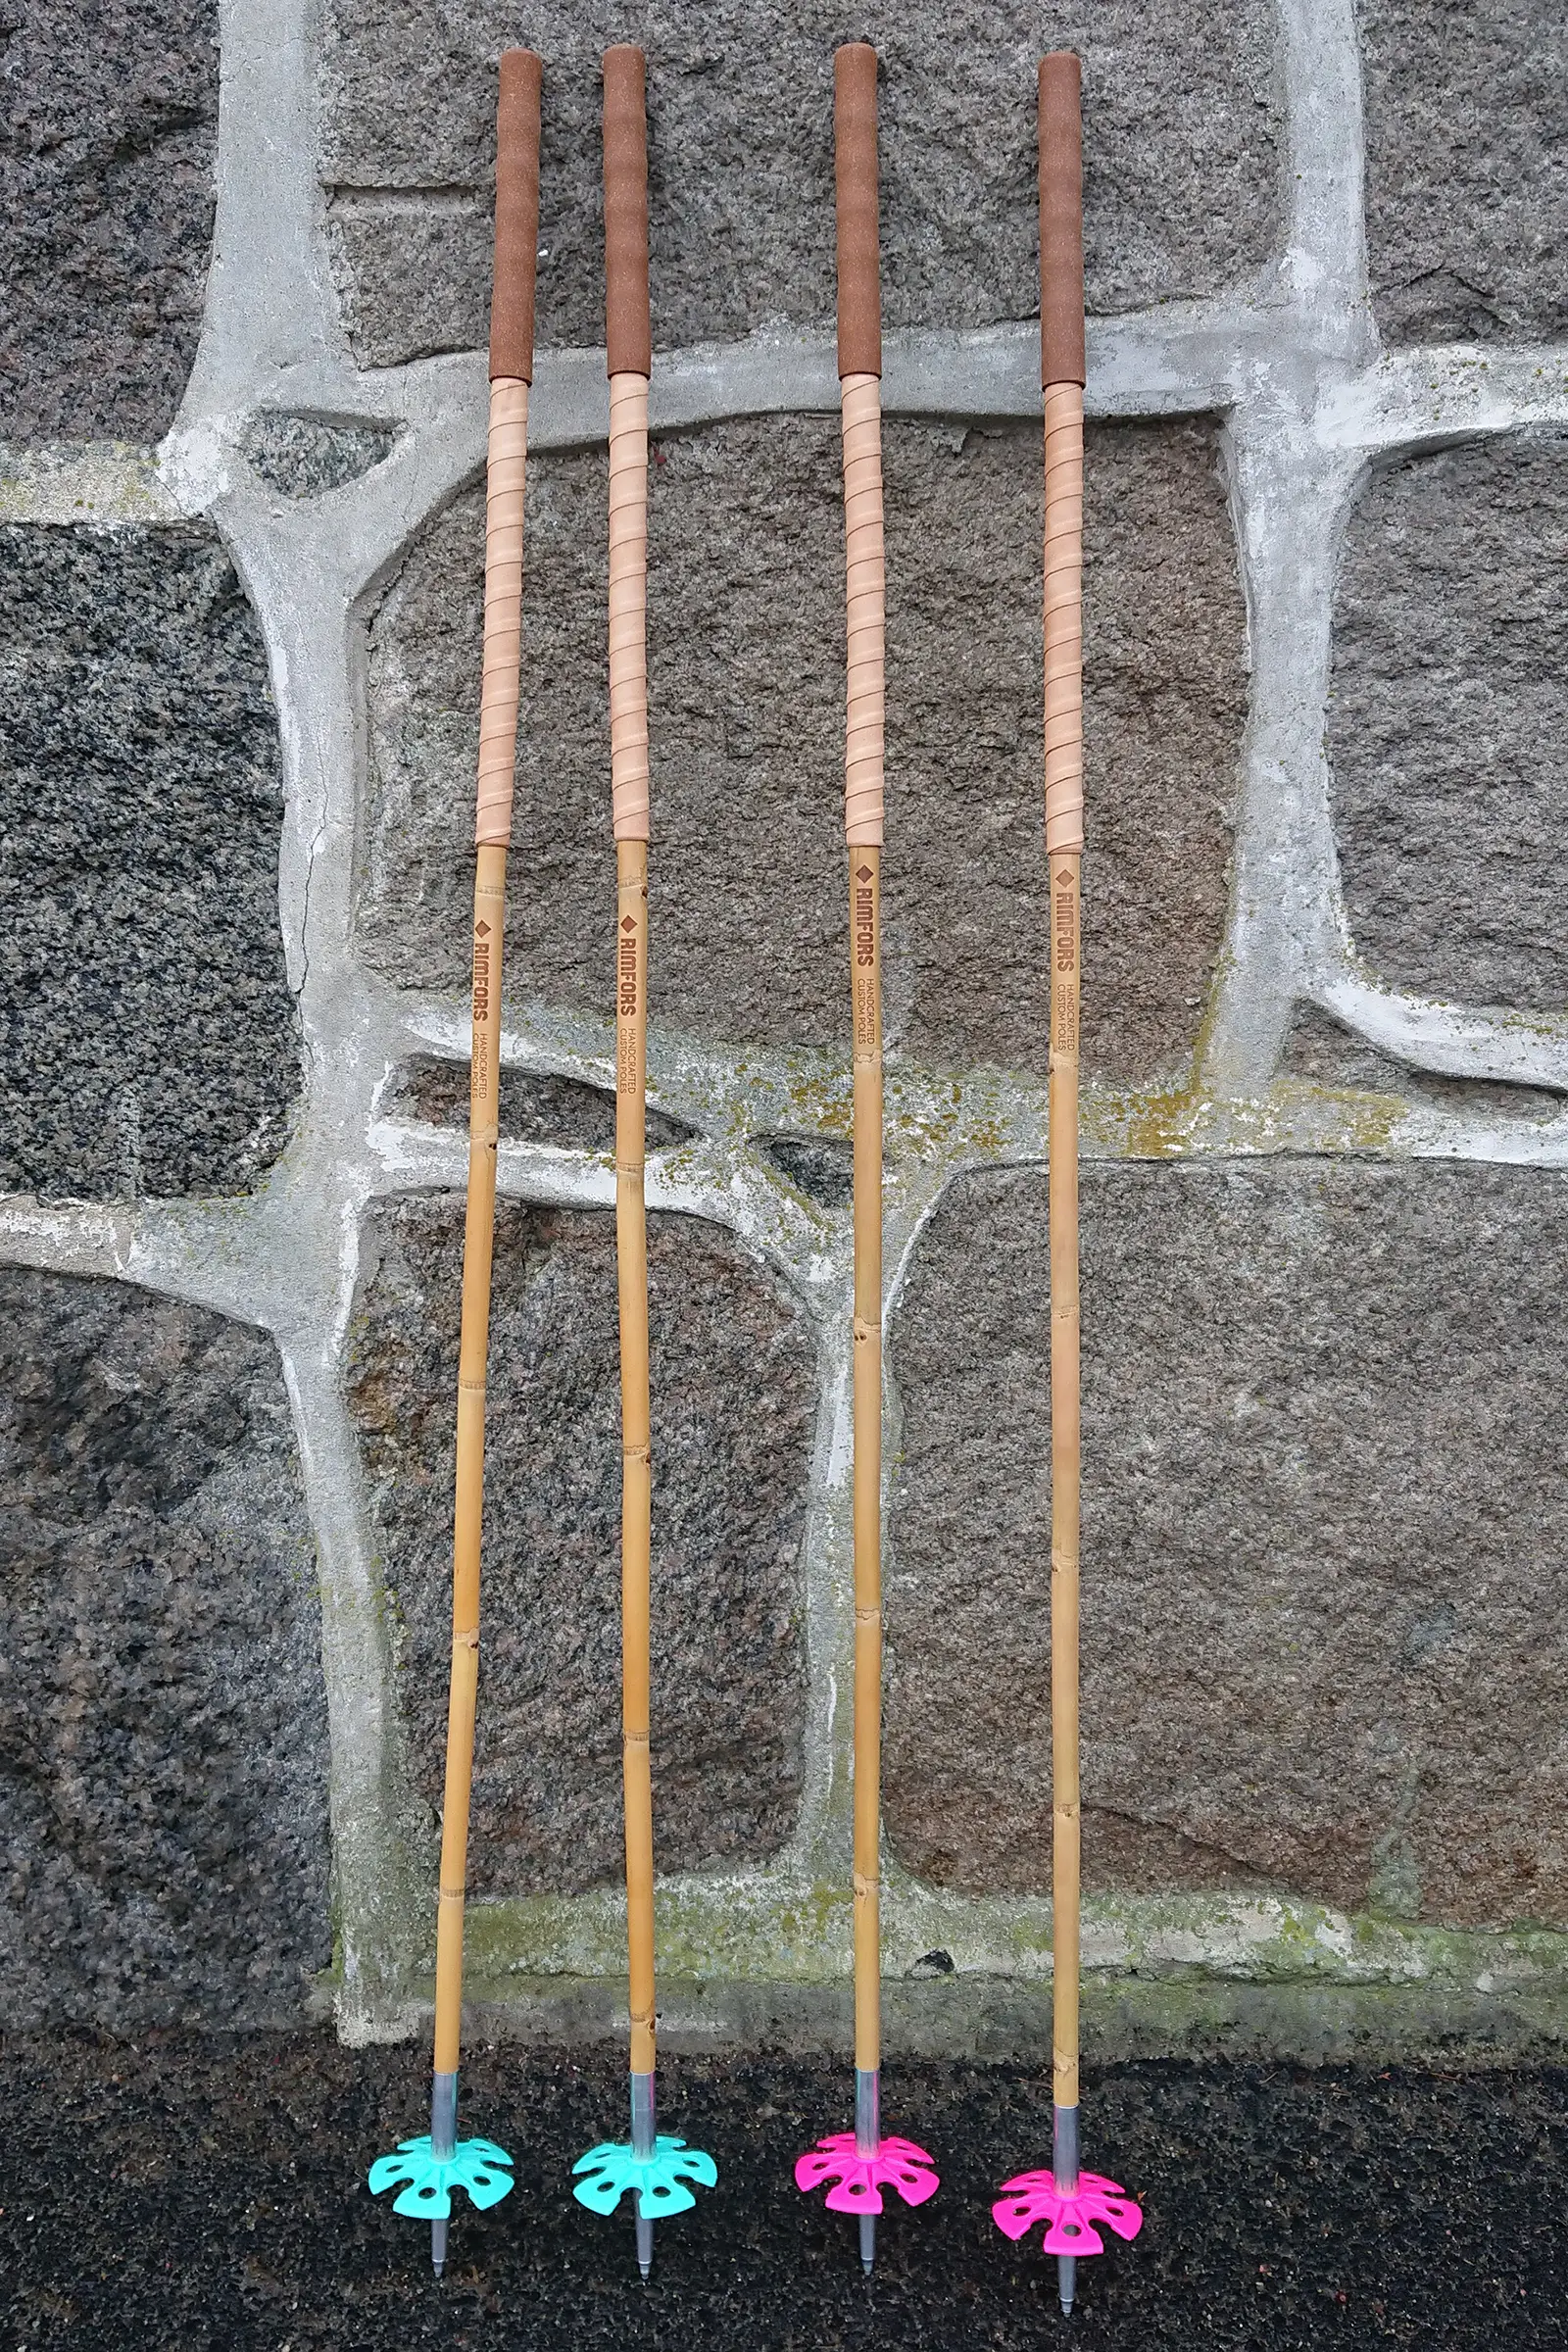 Two pairs of ski touring poles, one turquoise and one pink, inspired by Les Bâtons d'Alain but made of bamboo, with 20 cm cork grip and 25 cm grip extenstions below of bark tanned reindeer leather.